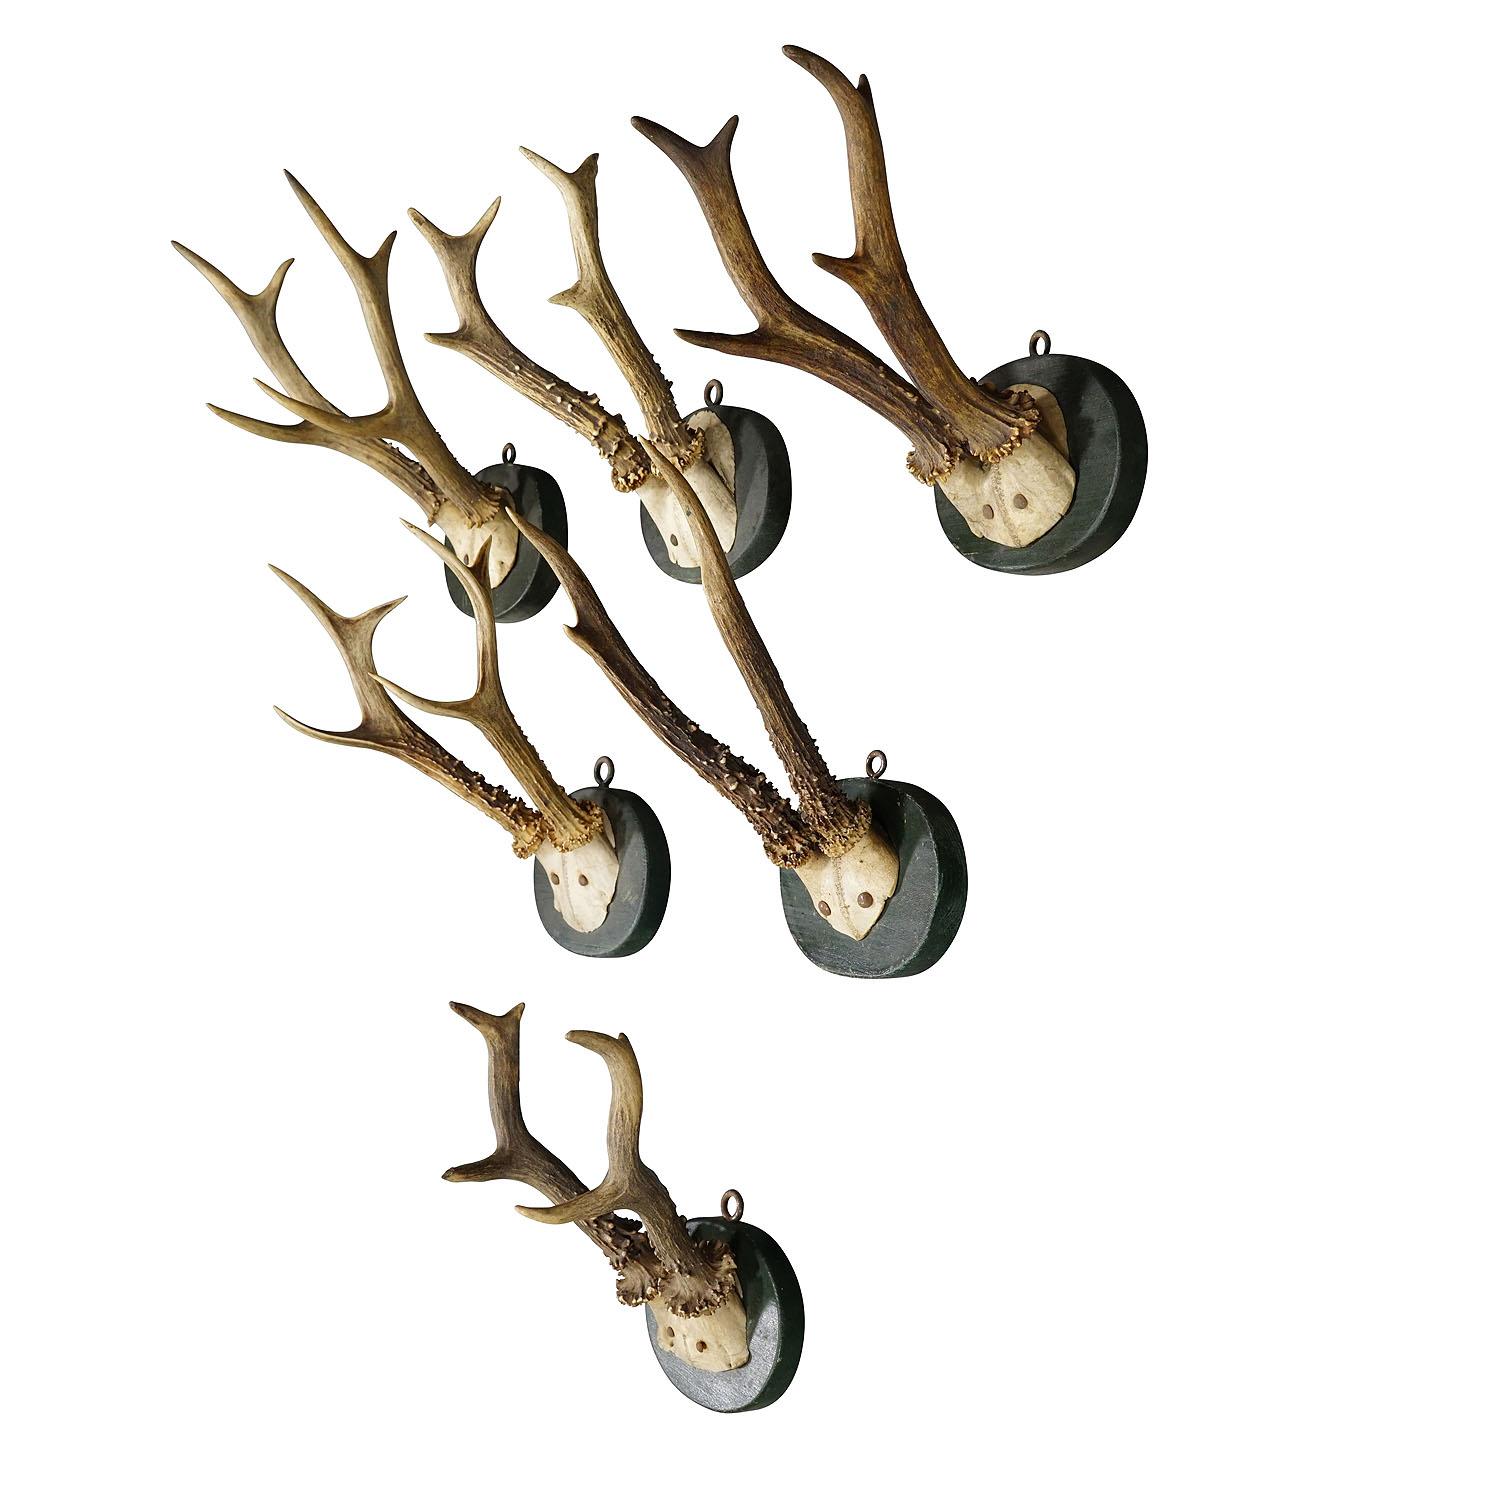 A Set of Six Antique Black Forest Deer Trophies on Wooden Plaques 1880s

A set of six antique Black Forest roe deer (Capreolus capreolus) trophies mounted on turned wooden plaques with a dark green finish. The trophies were shot in Germany in the